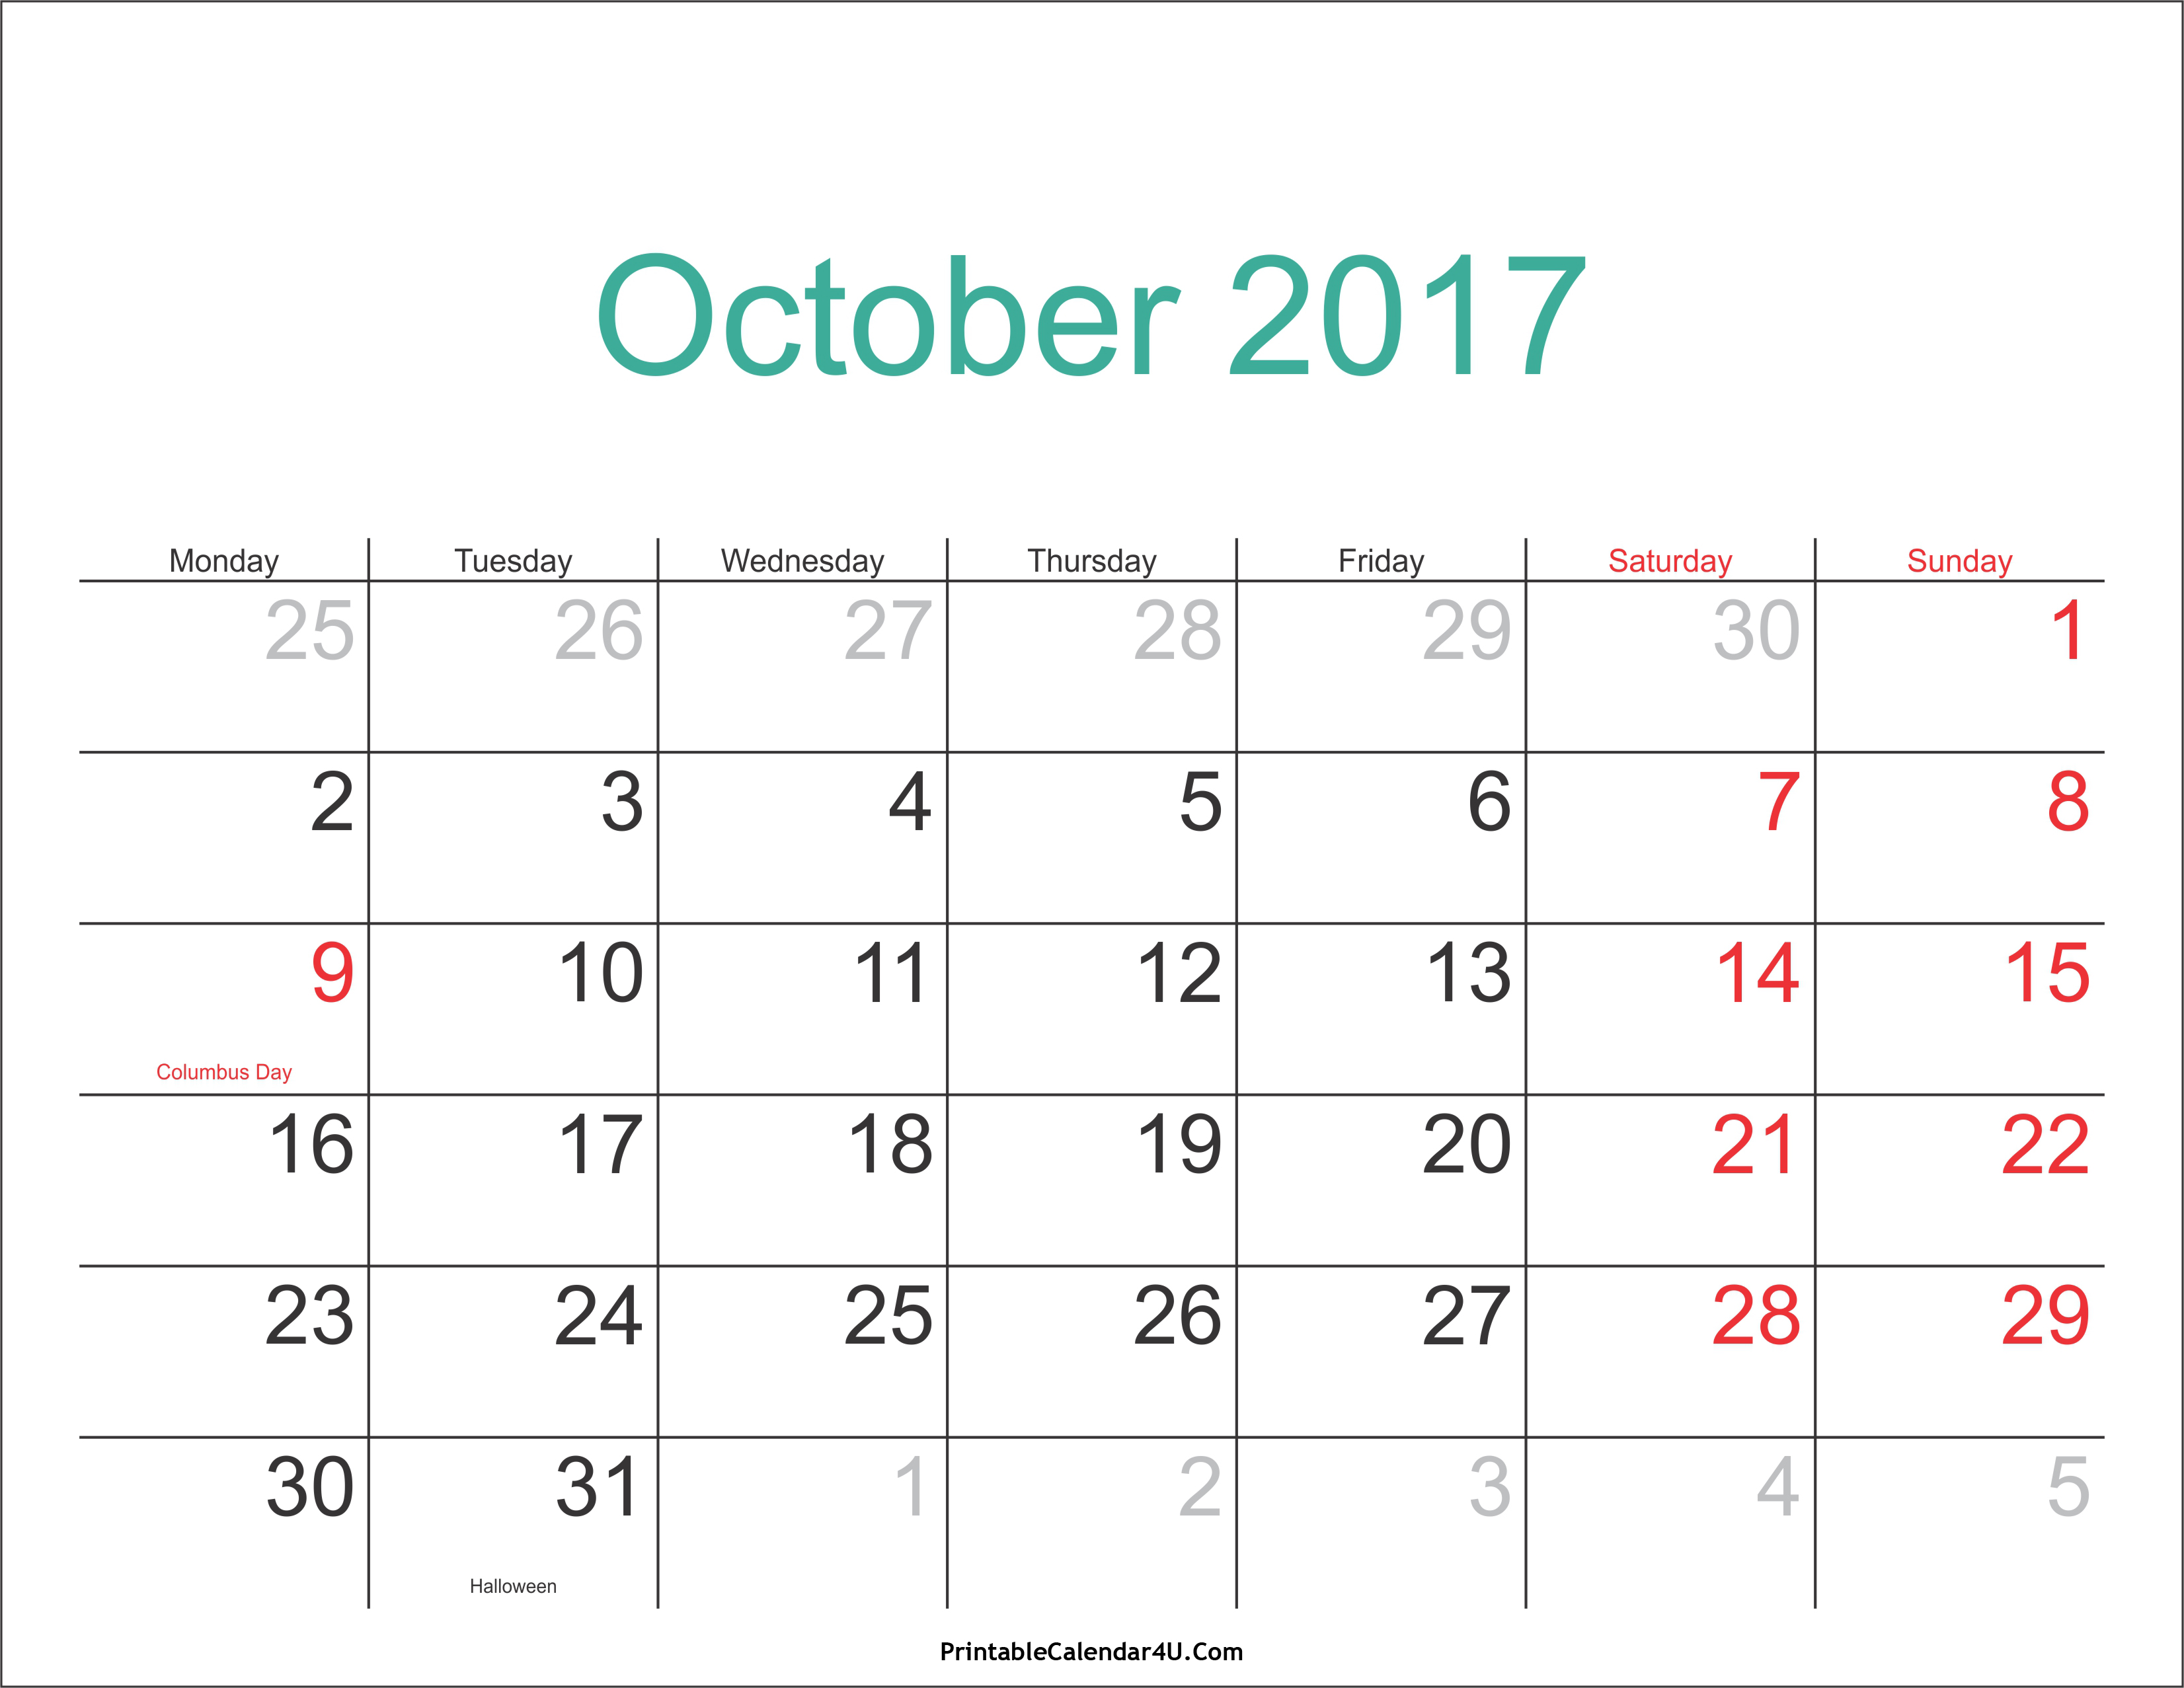 October 2017 Calendar Printable with Holidays PDF and 